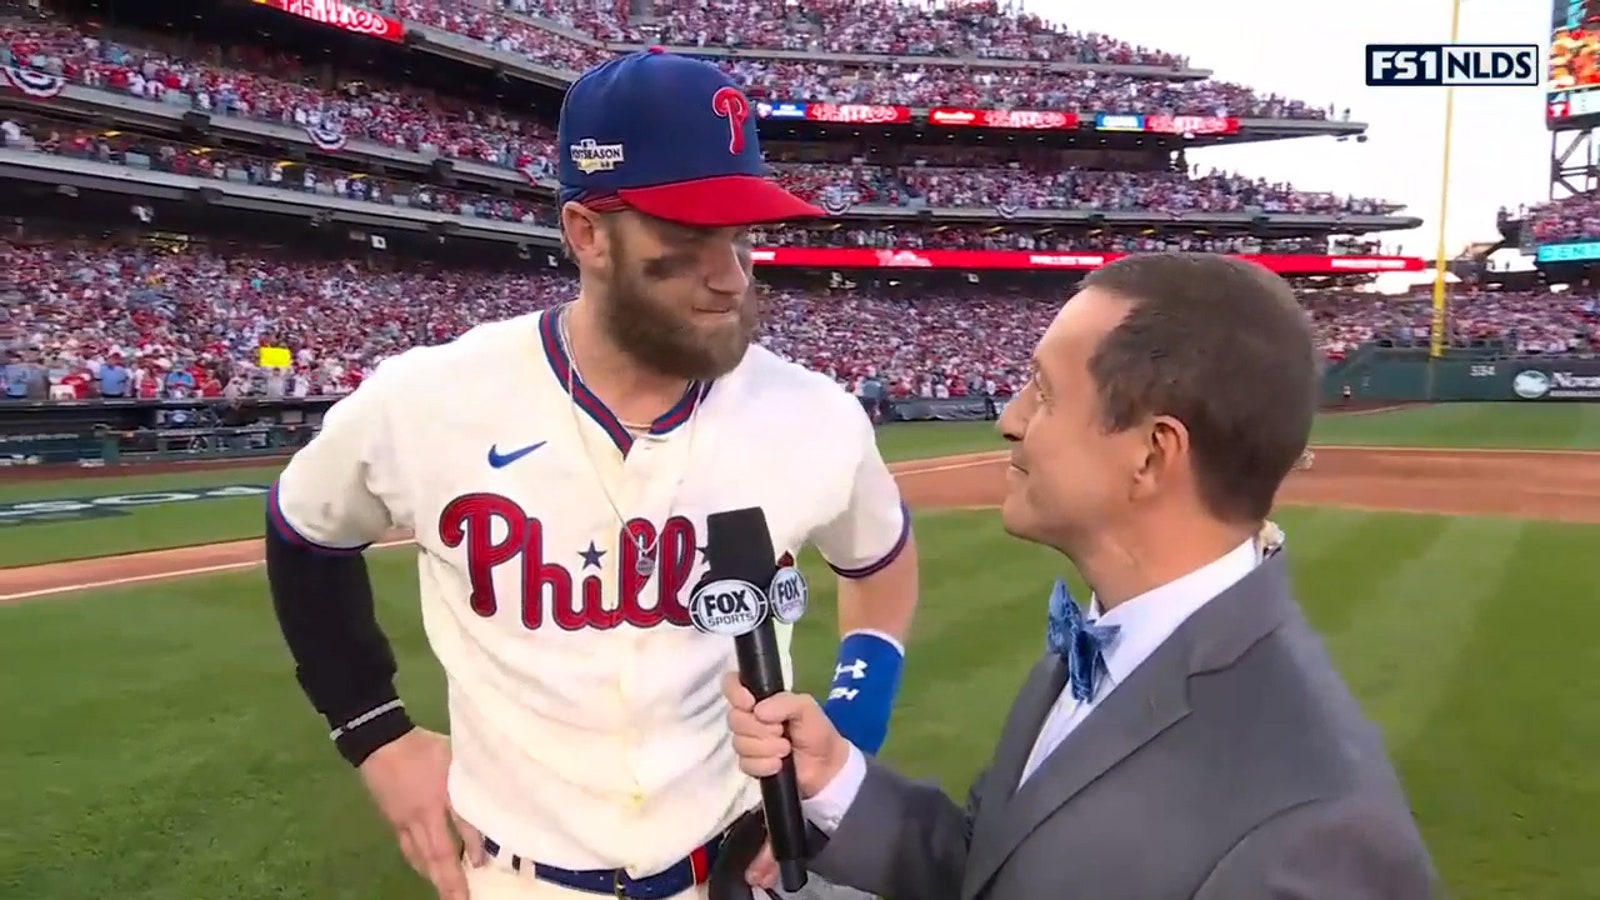 'You got to beat the champs to be the champs' — Bryce Harper talks to Ken Rosenthal after Game 4